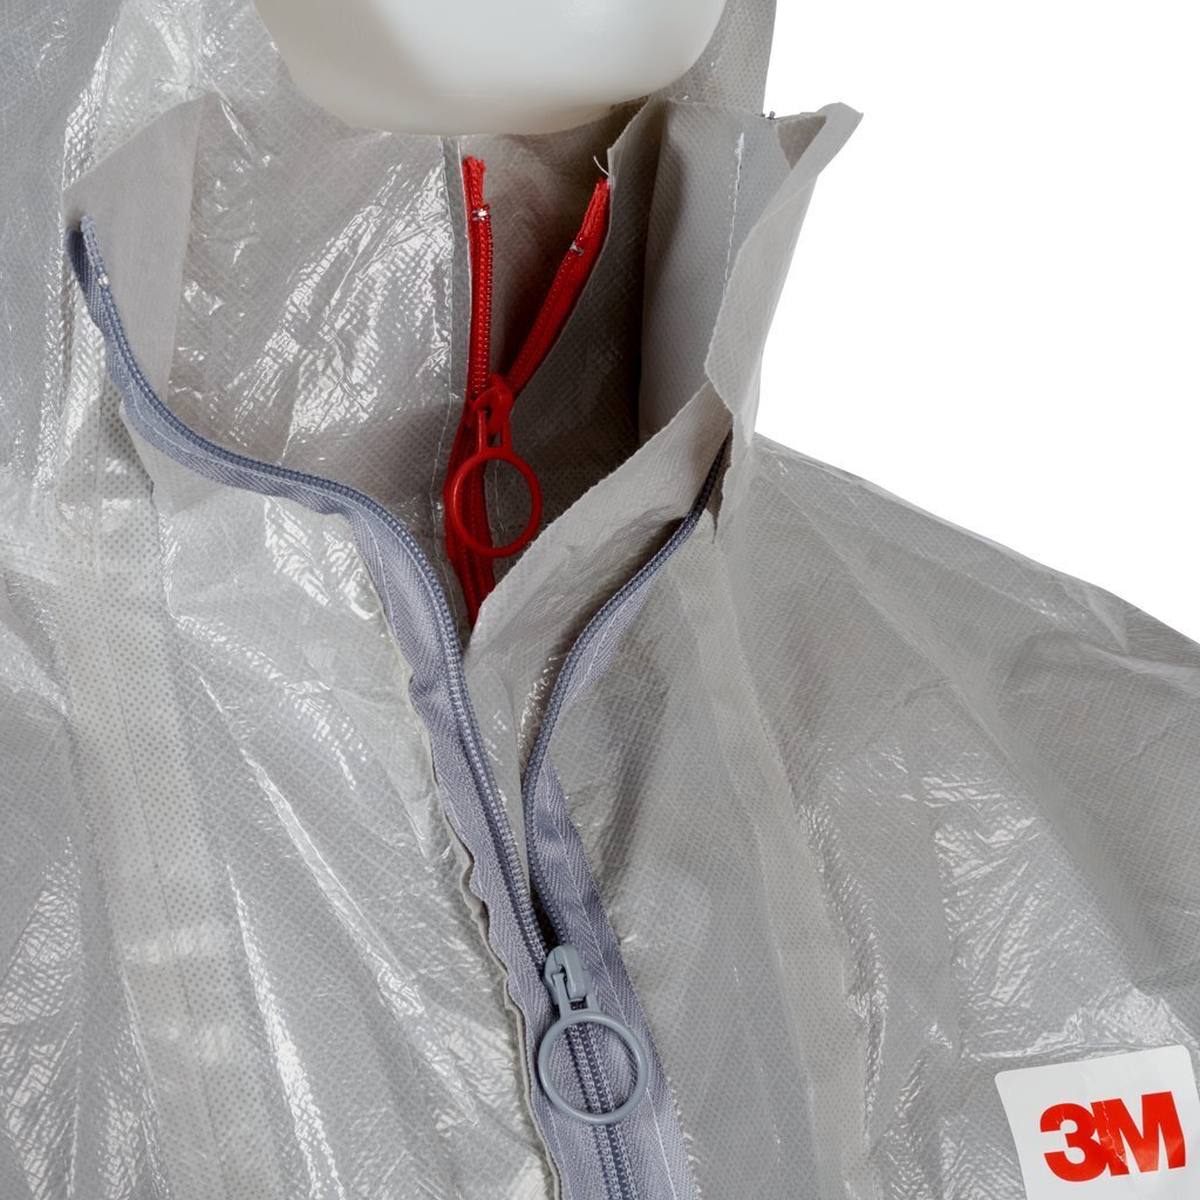 3M 4570 coverall, gray, type 3/4/5/6, size XL, extremely robust, sealed seams, double zipper, light and supple material, size XL